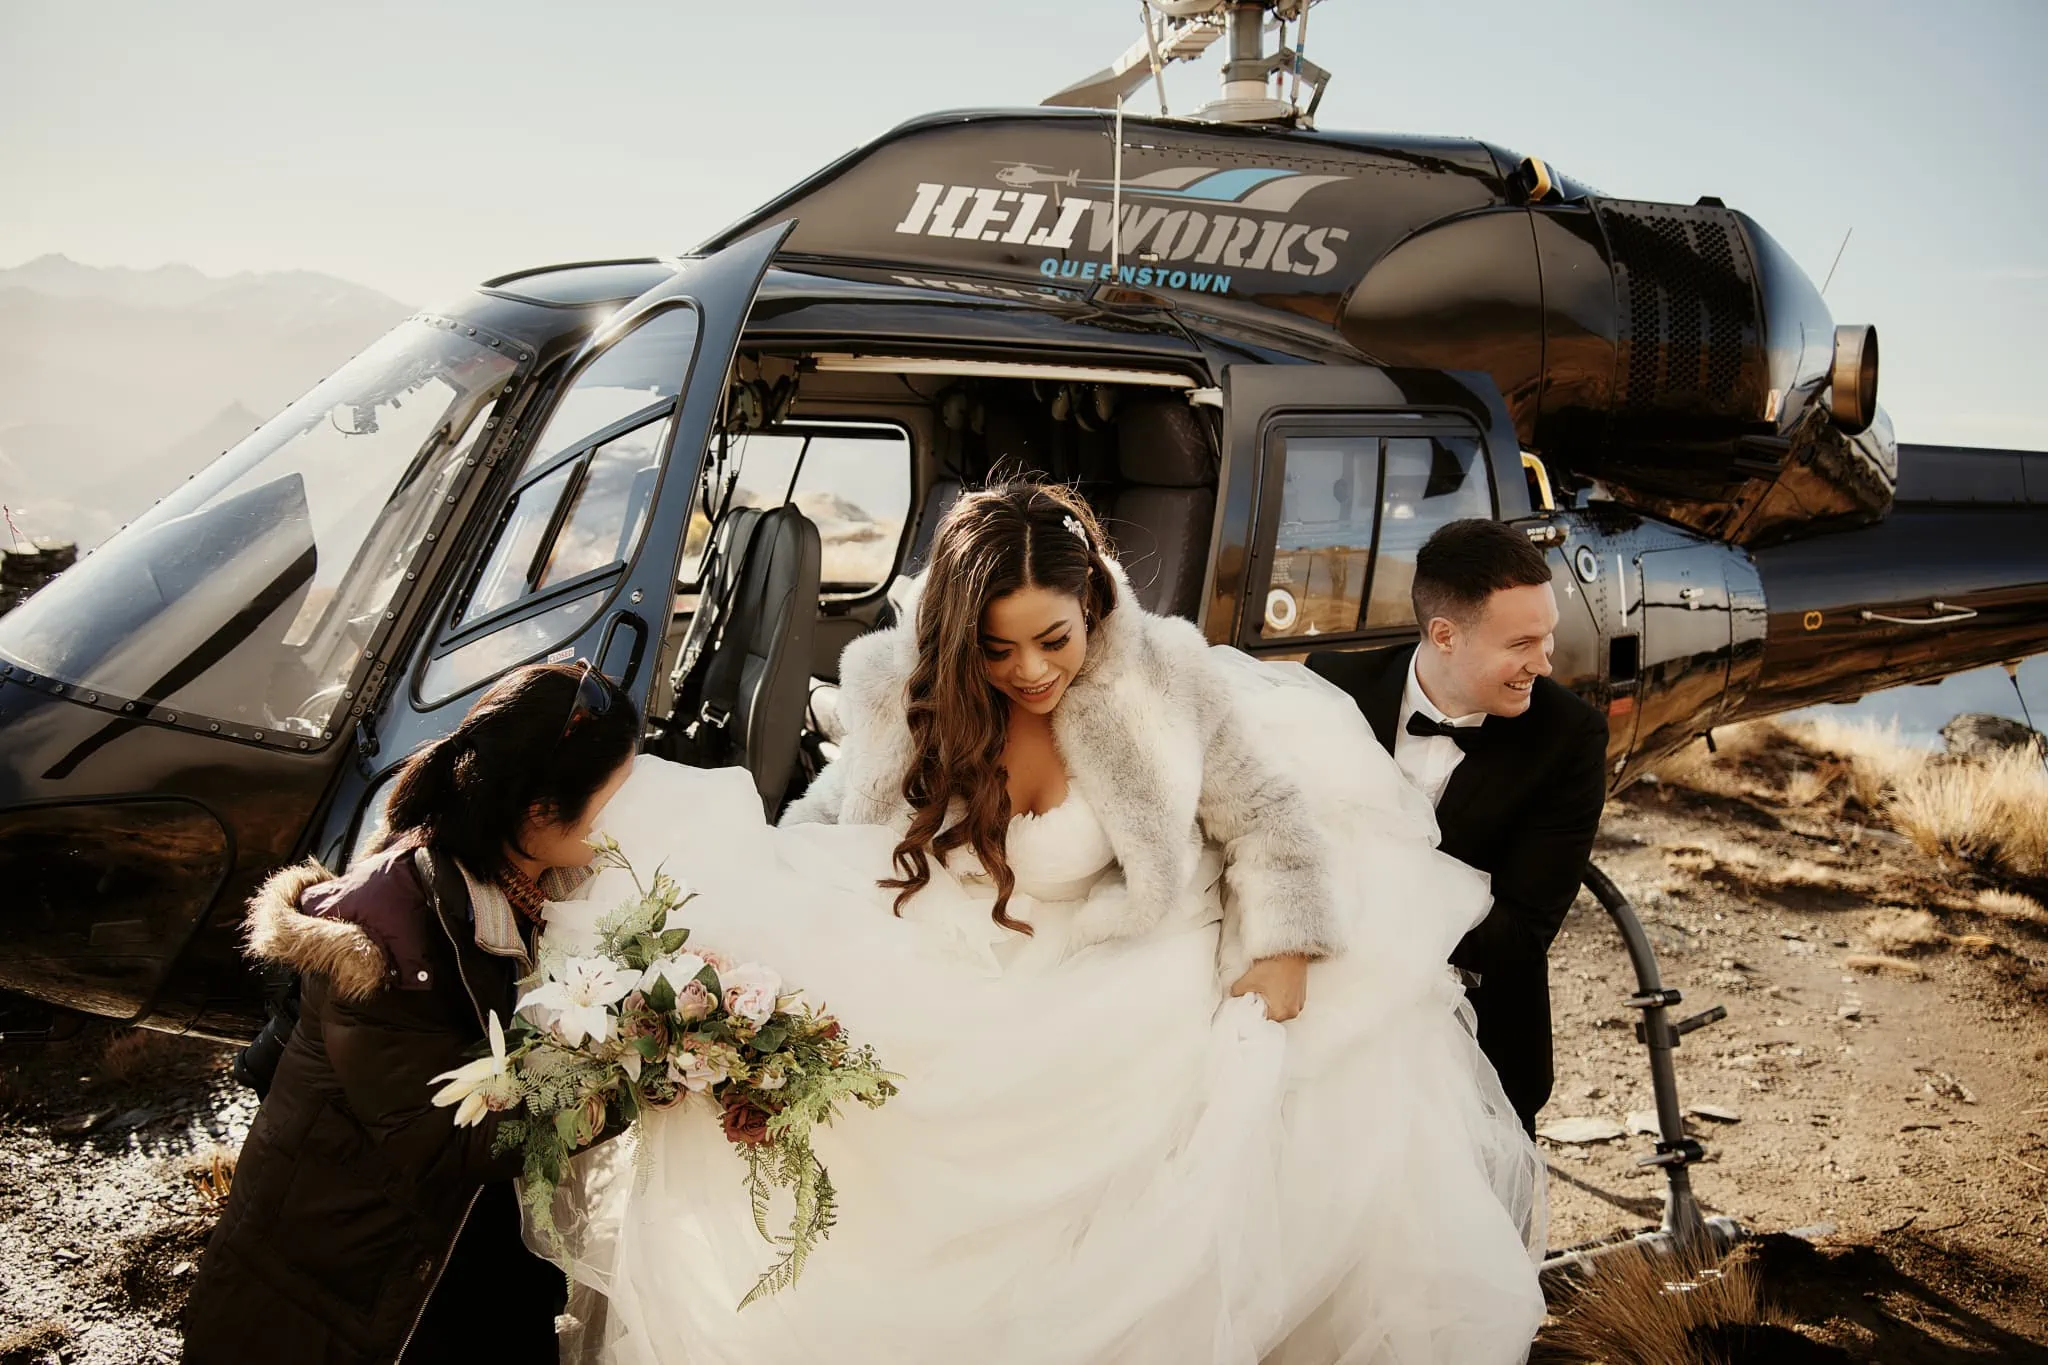 Queenstown New Zealand Elopement Wedding Photographer - Amy and Callum enjoy their Queenstown Heli Pre Wedding Shoot by arriving in a helicopter.